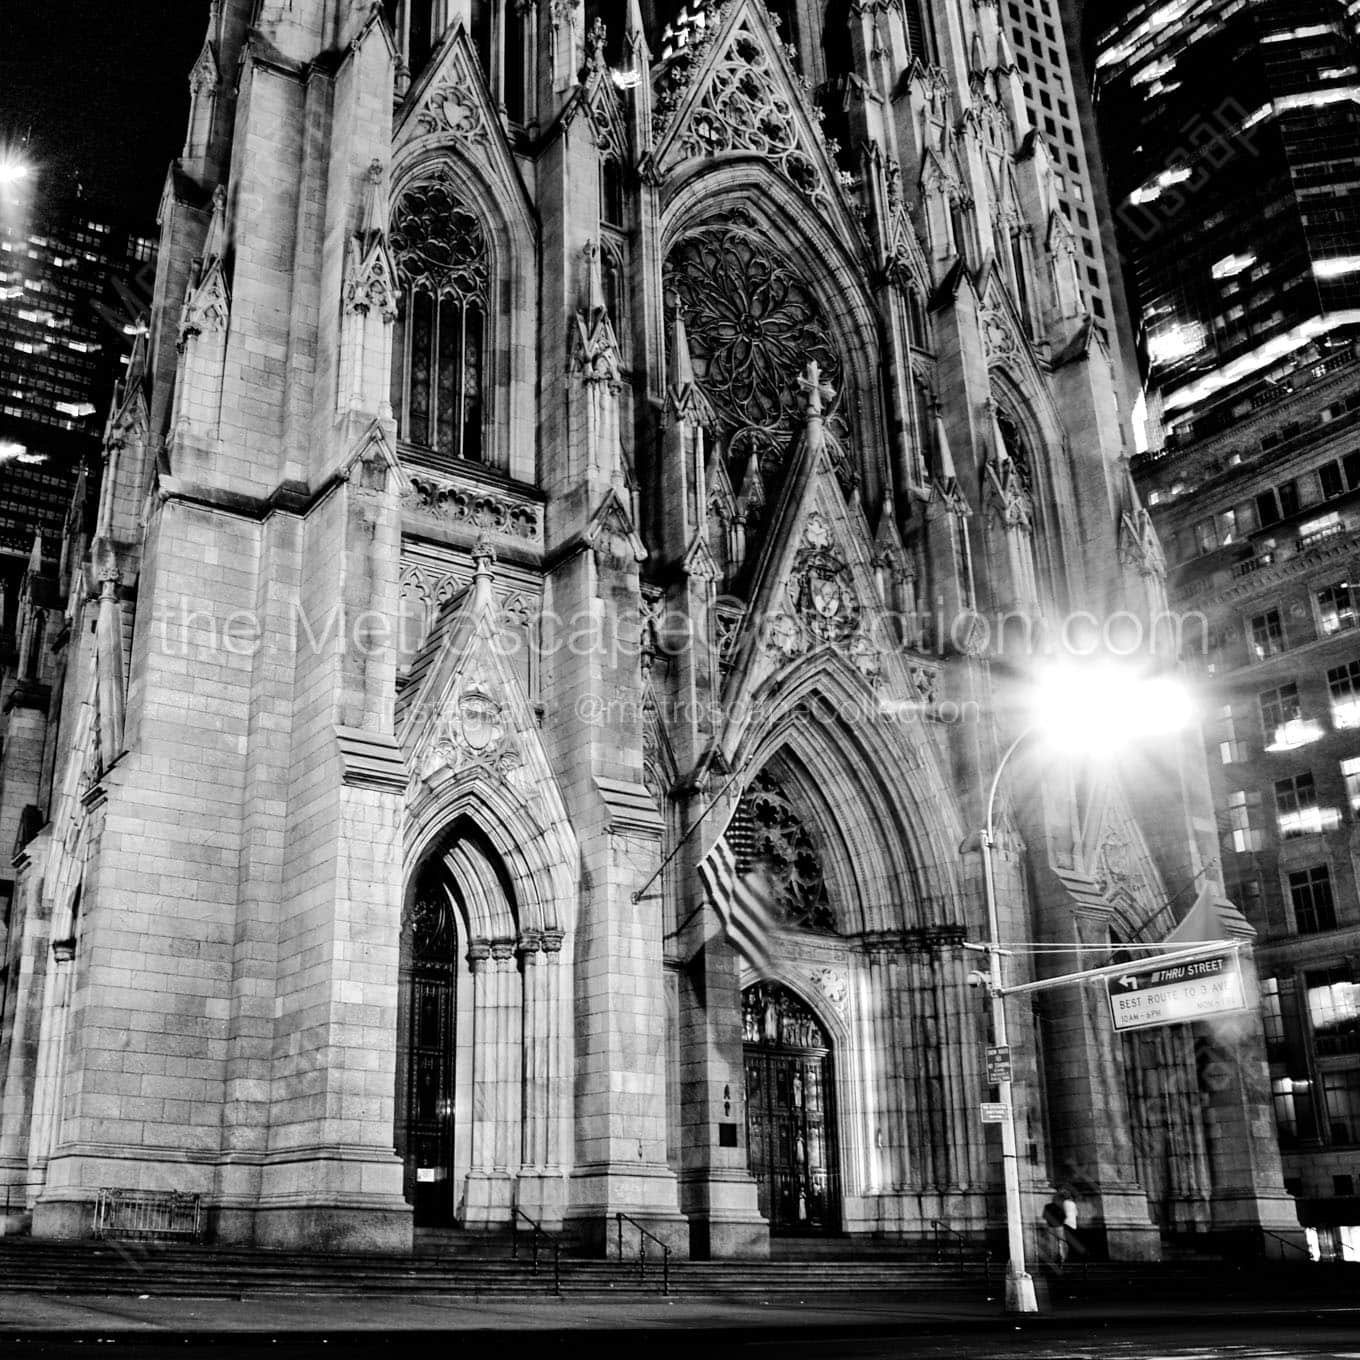 st patricks cathedral at night Black & White Office Art